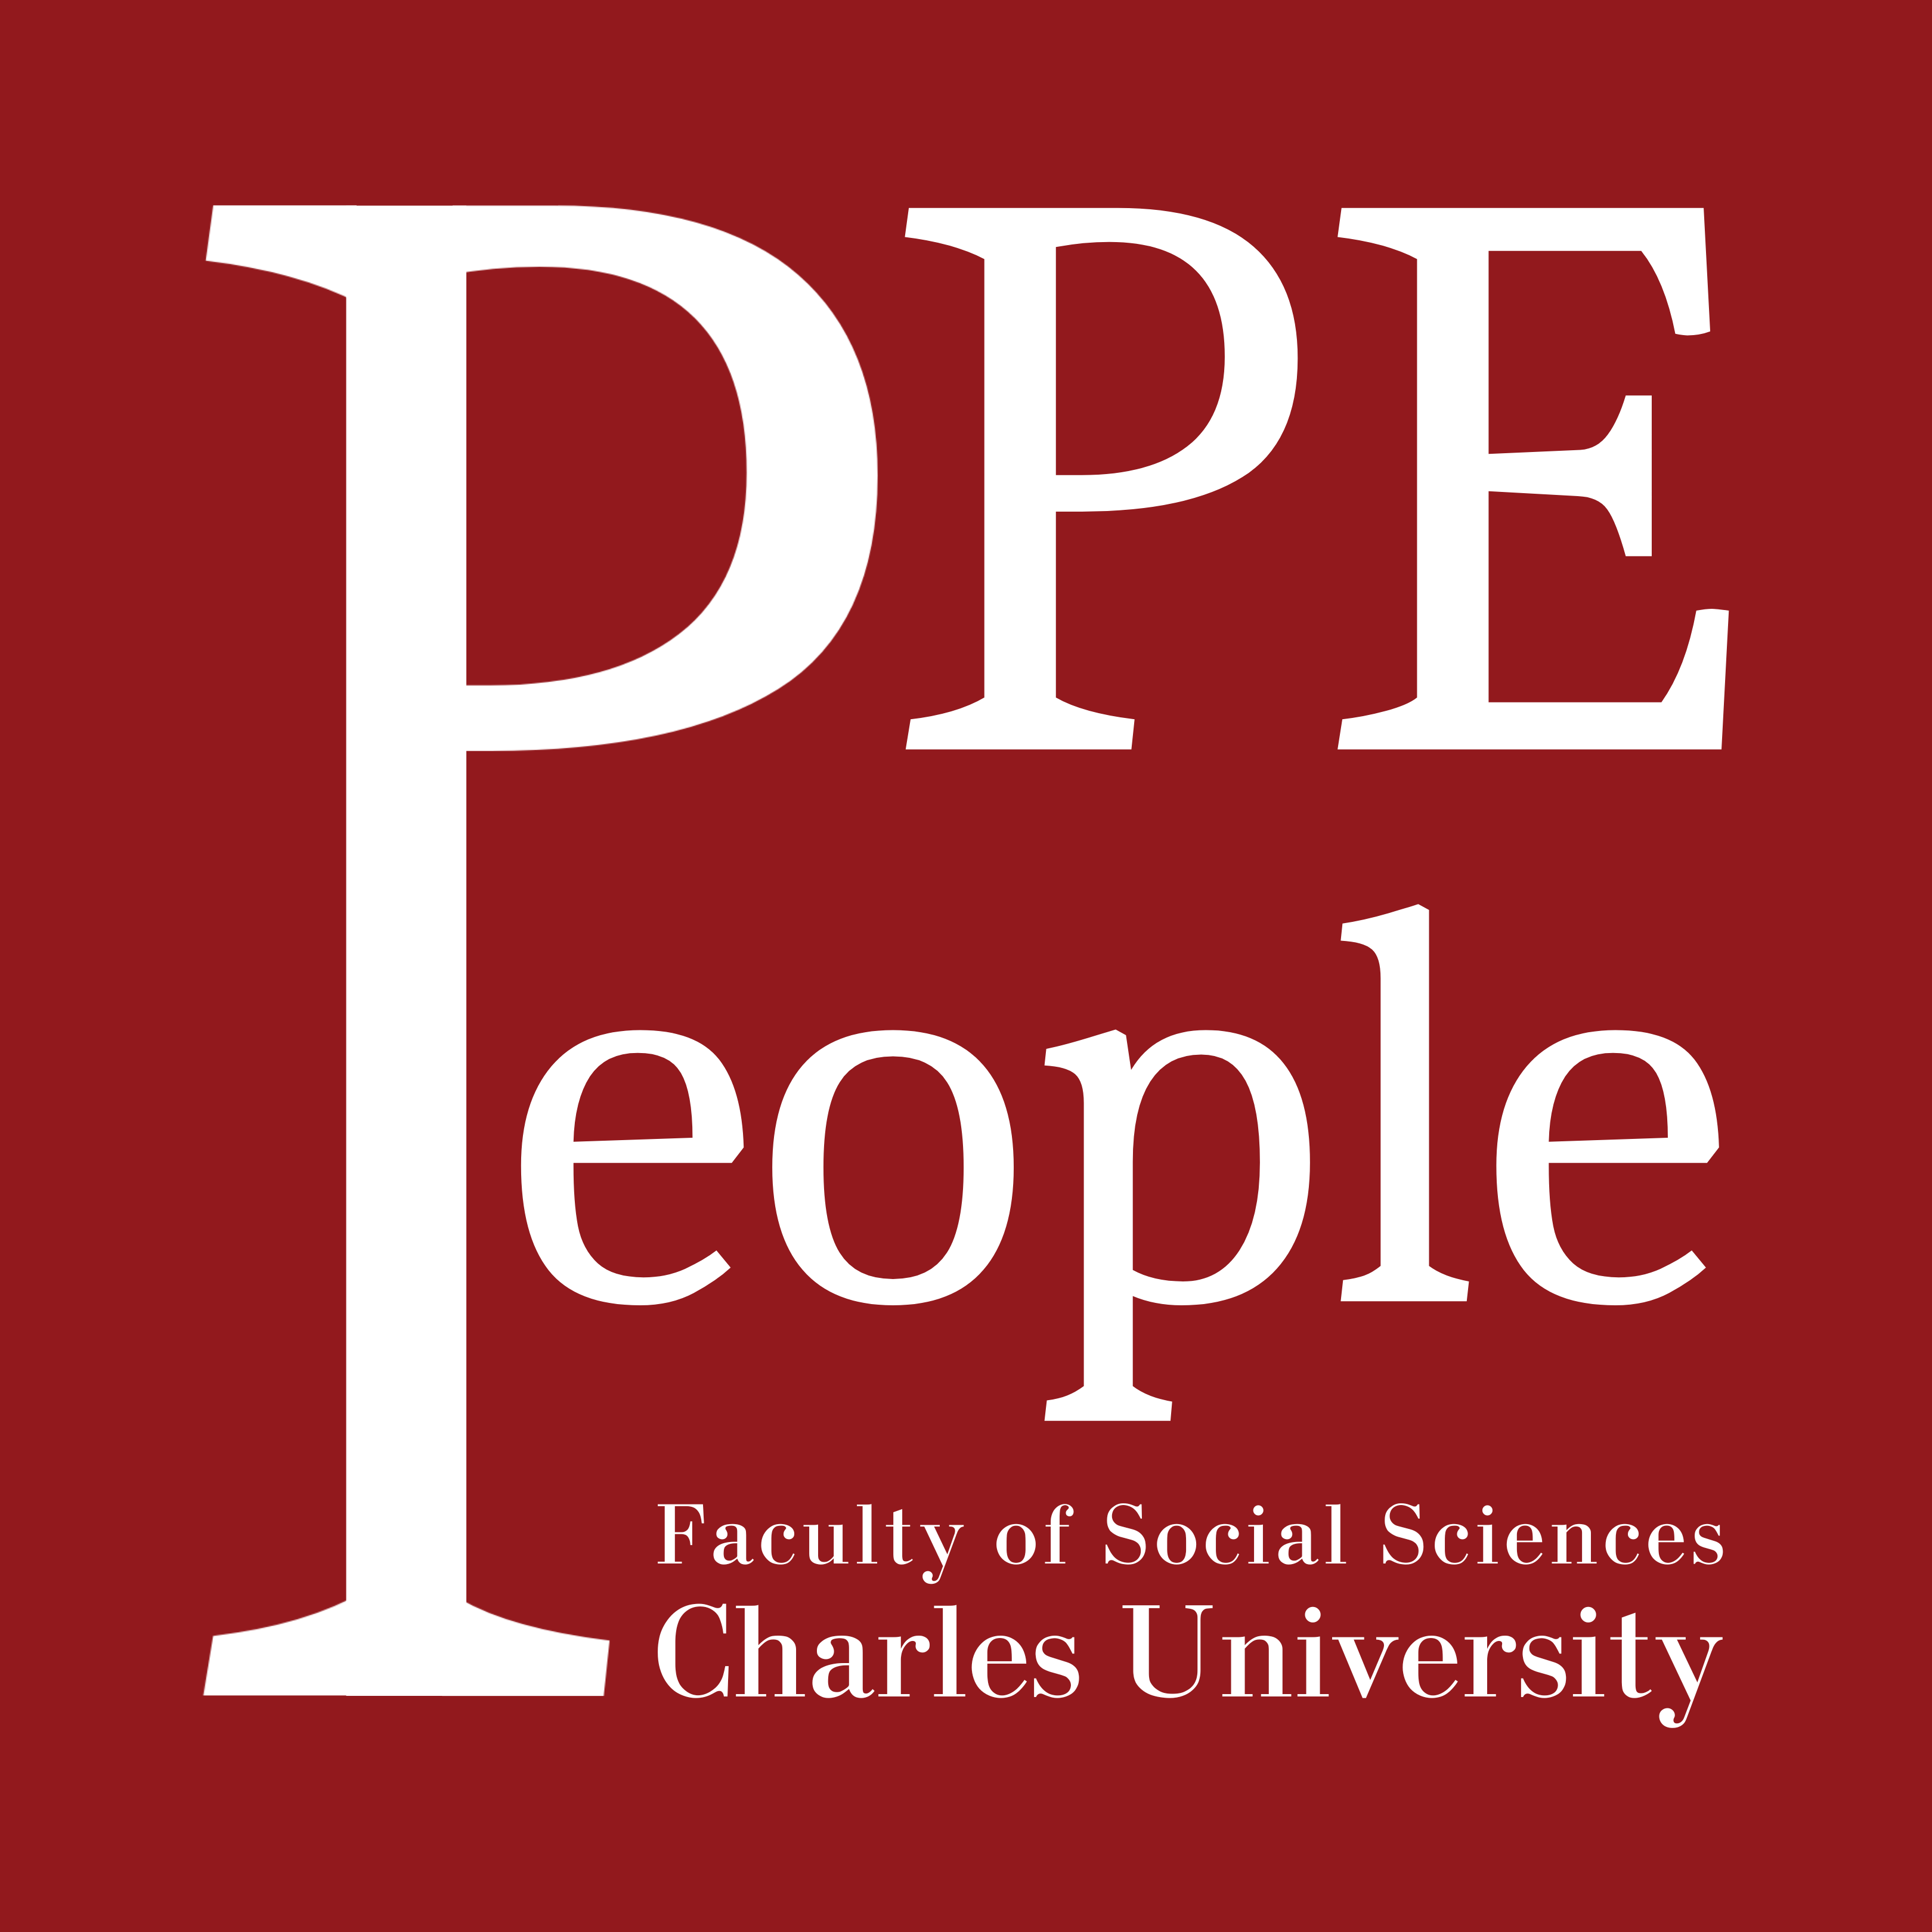 PPEople Society Logo